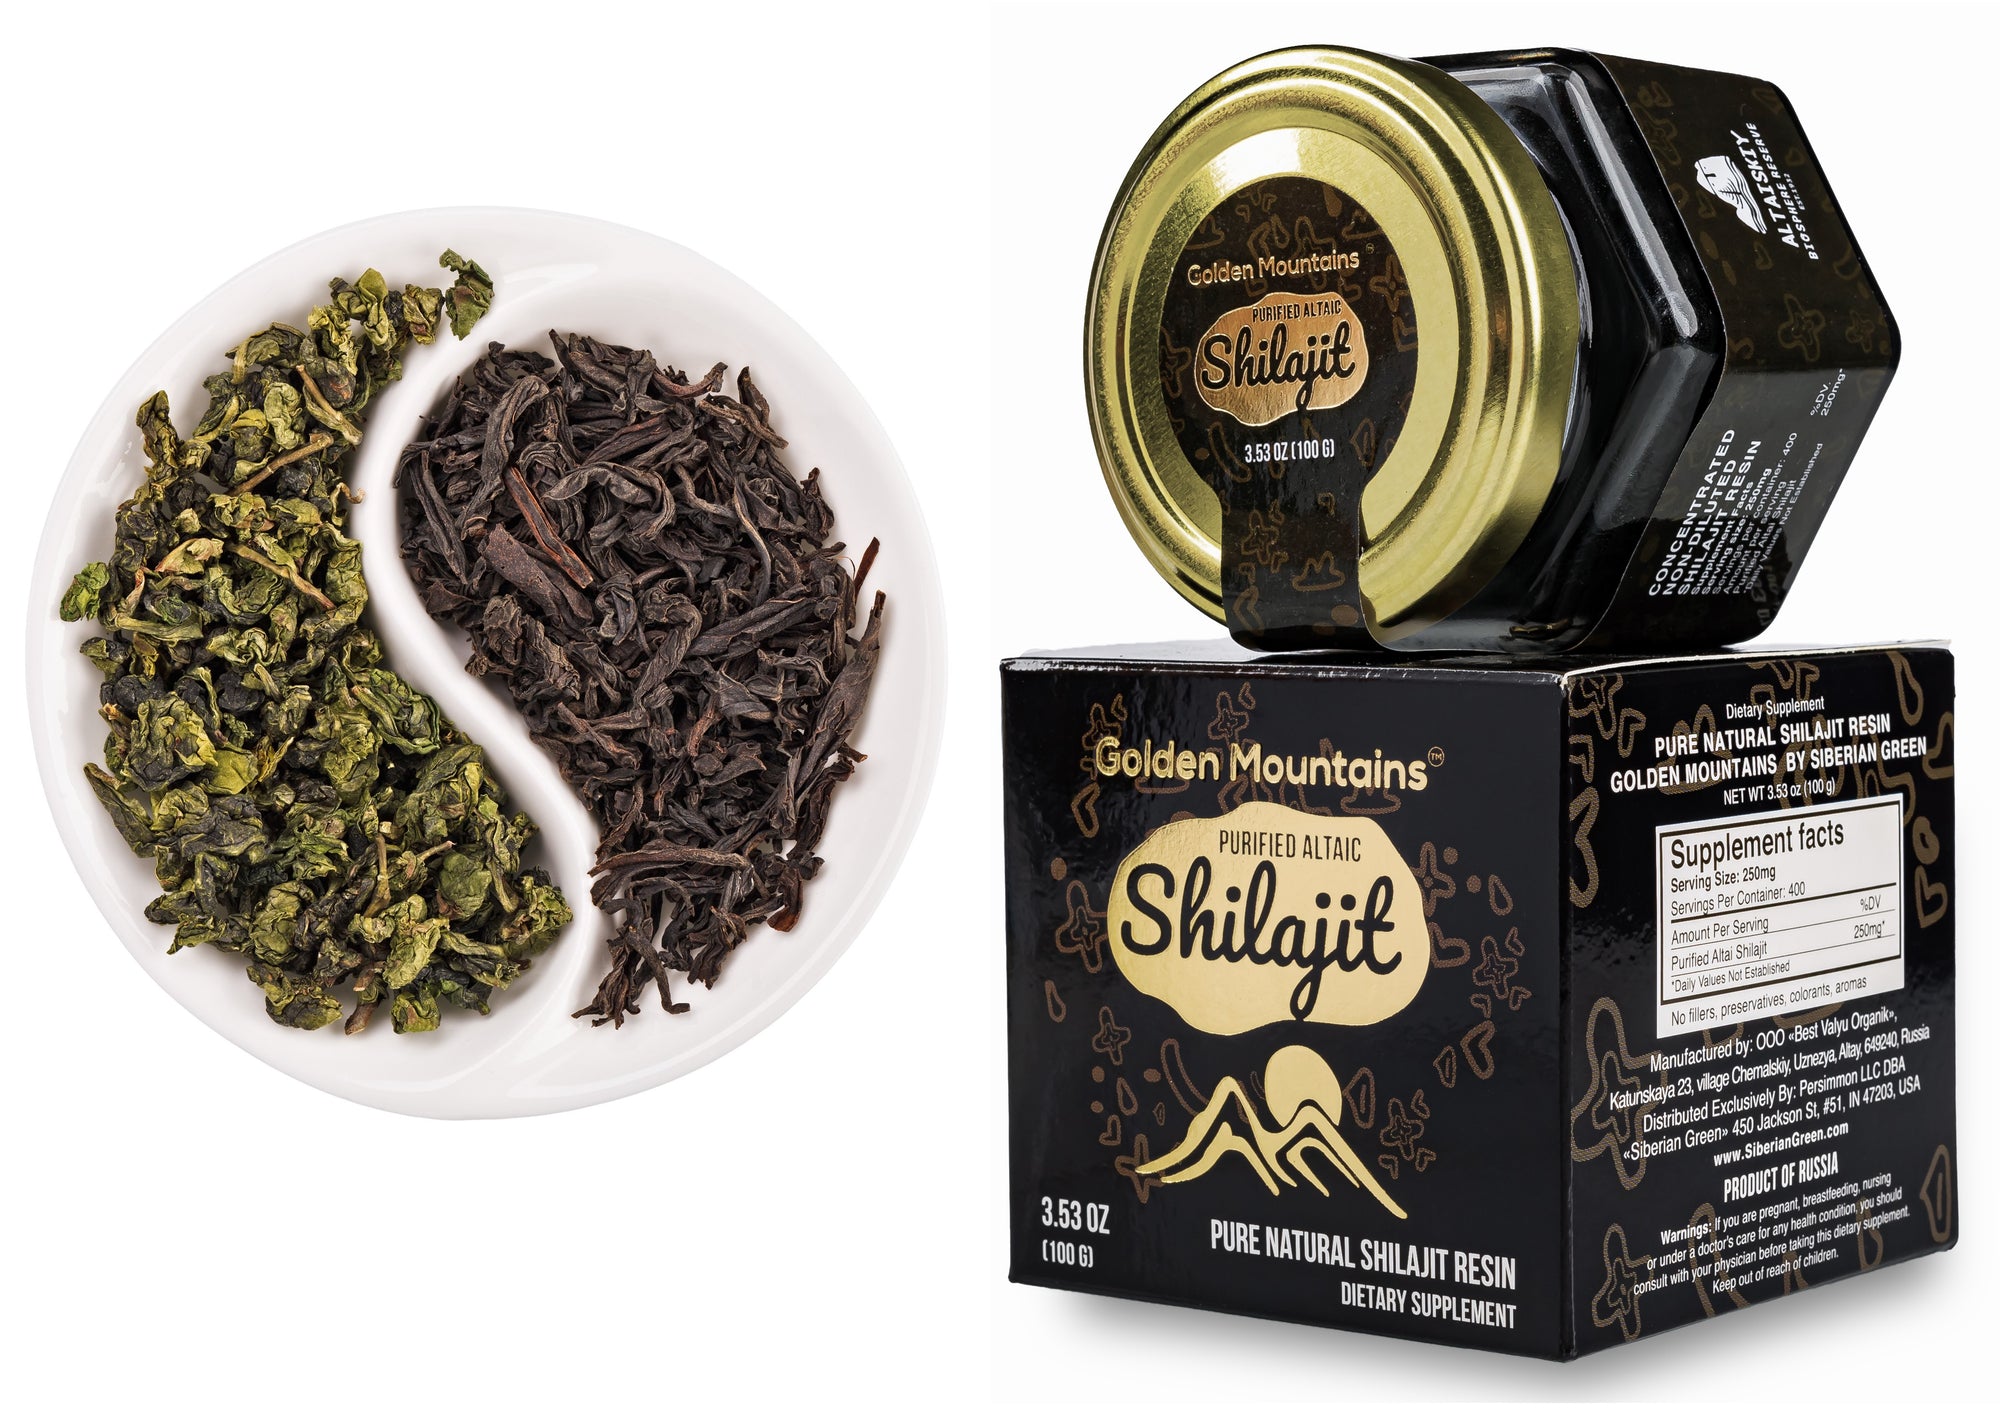 What tea is the best to mix Shilajit with?